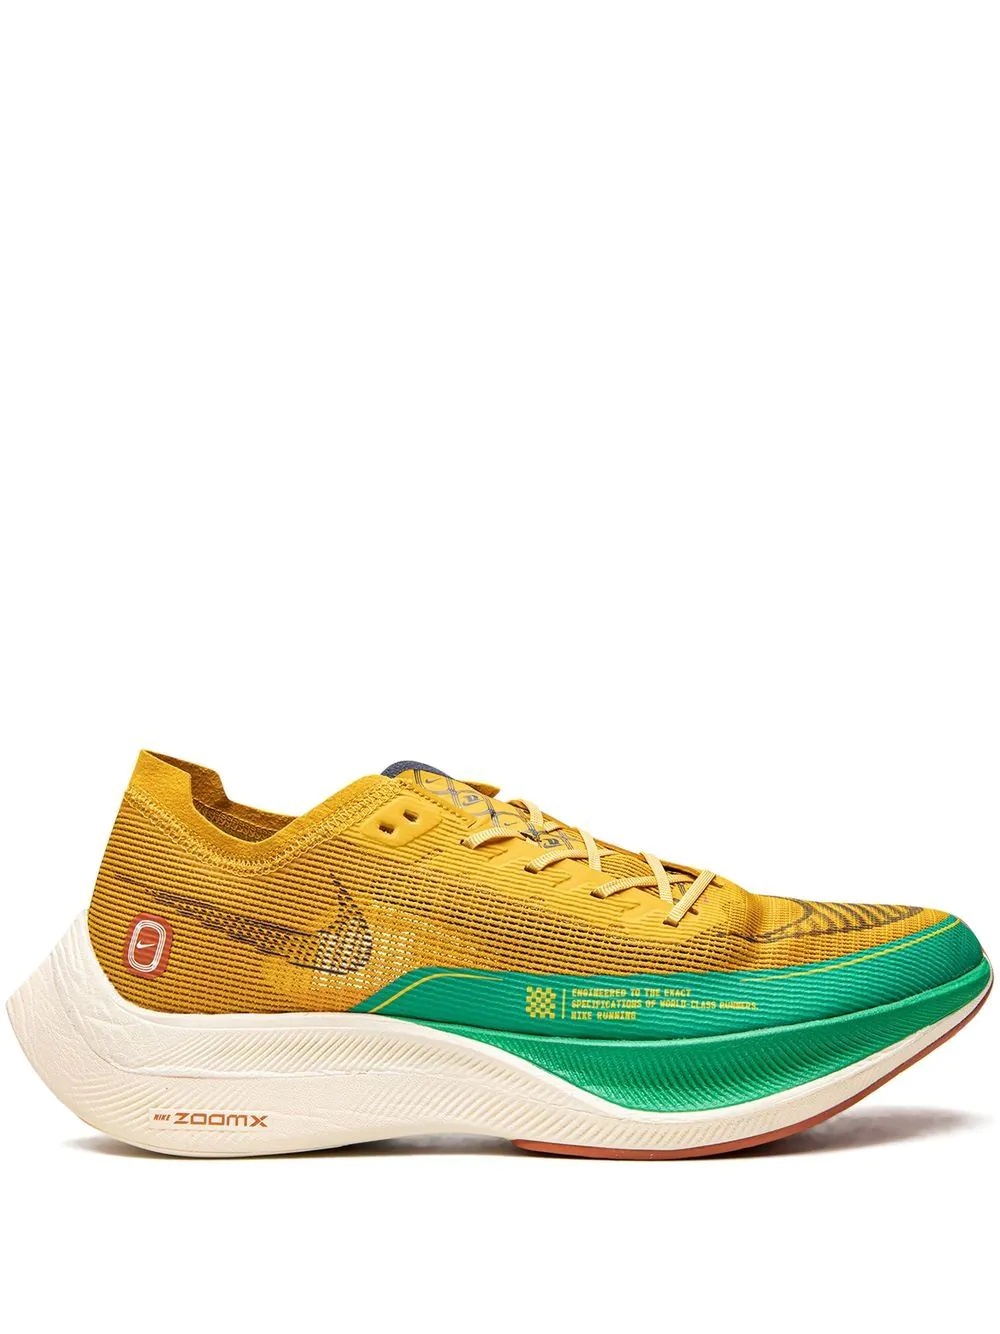 ZoomX Vaporfly Next % 2 sneakers - 1